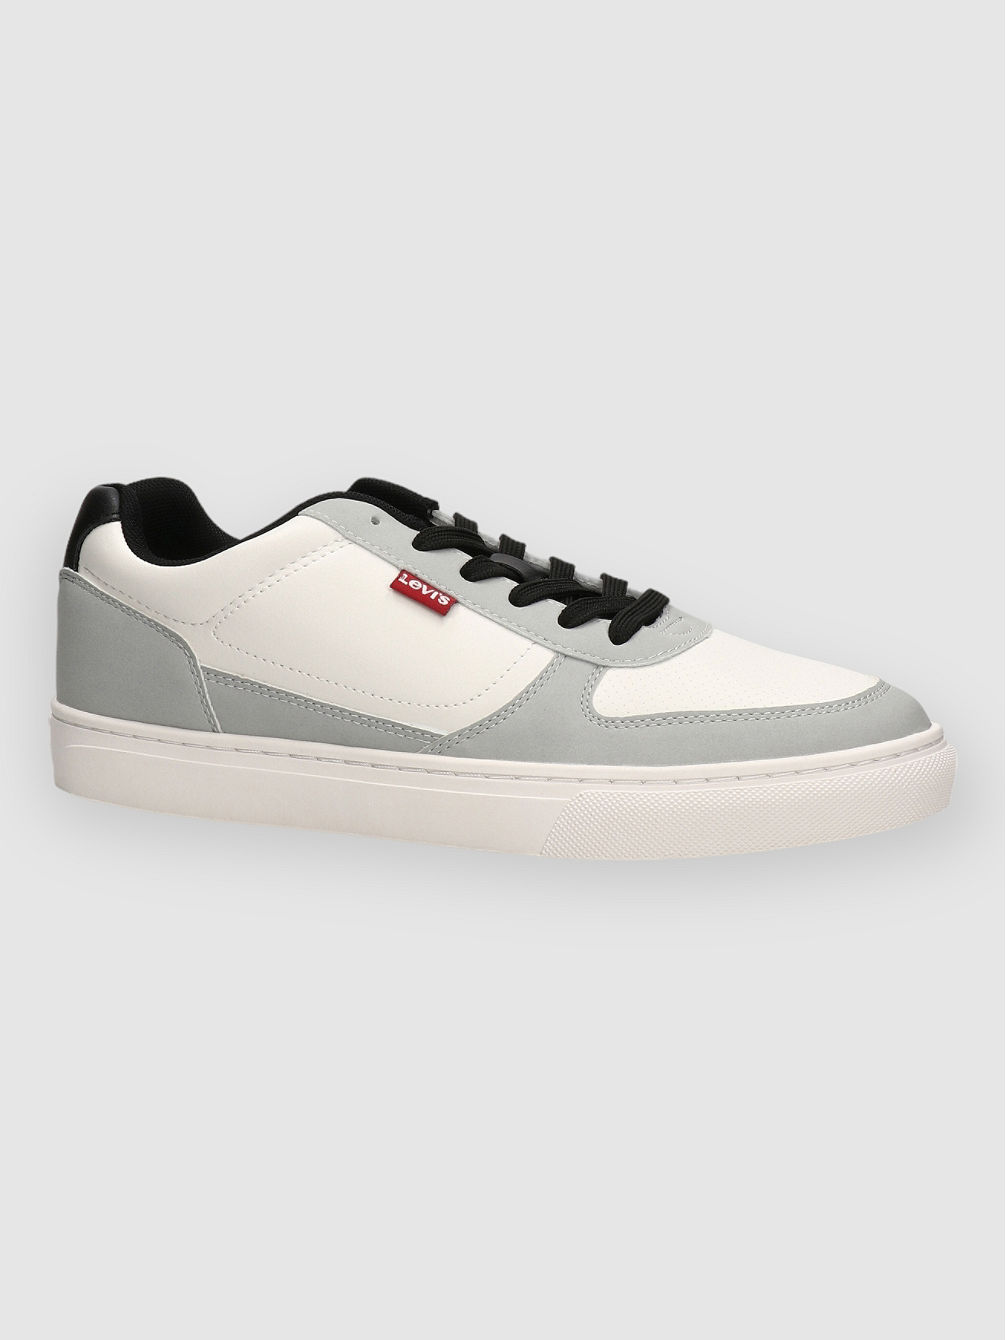 Buy Levi's Sneakers & Casual shoes for Men Online | FASHIOLA INDIA